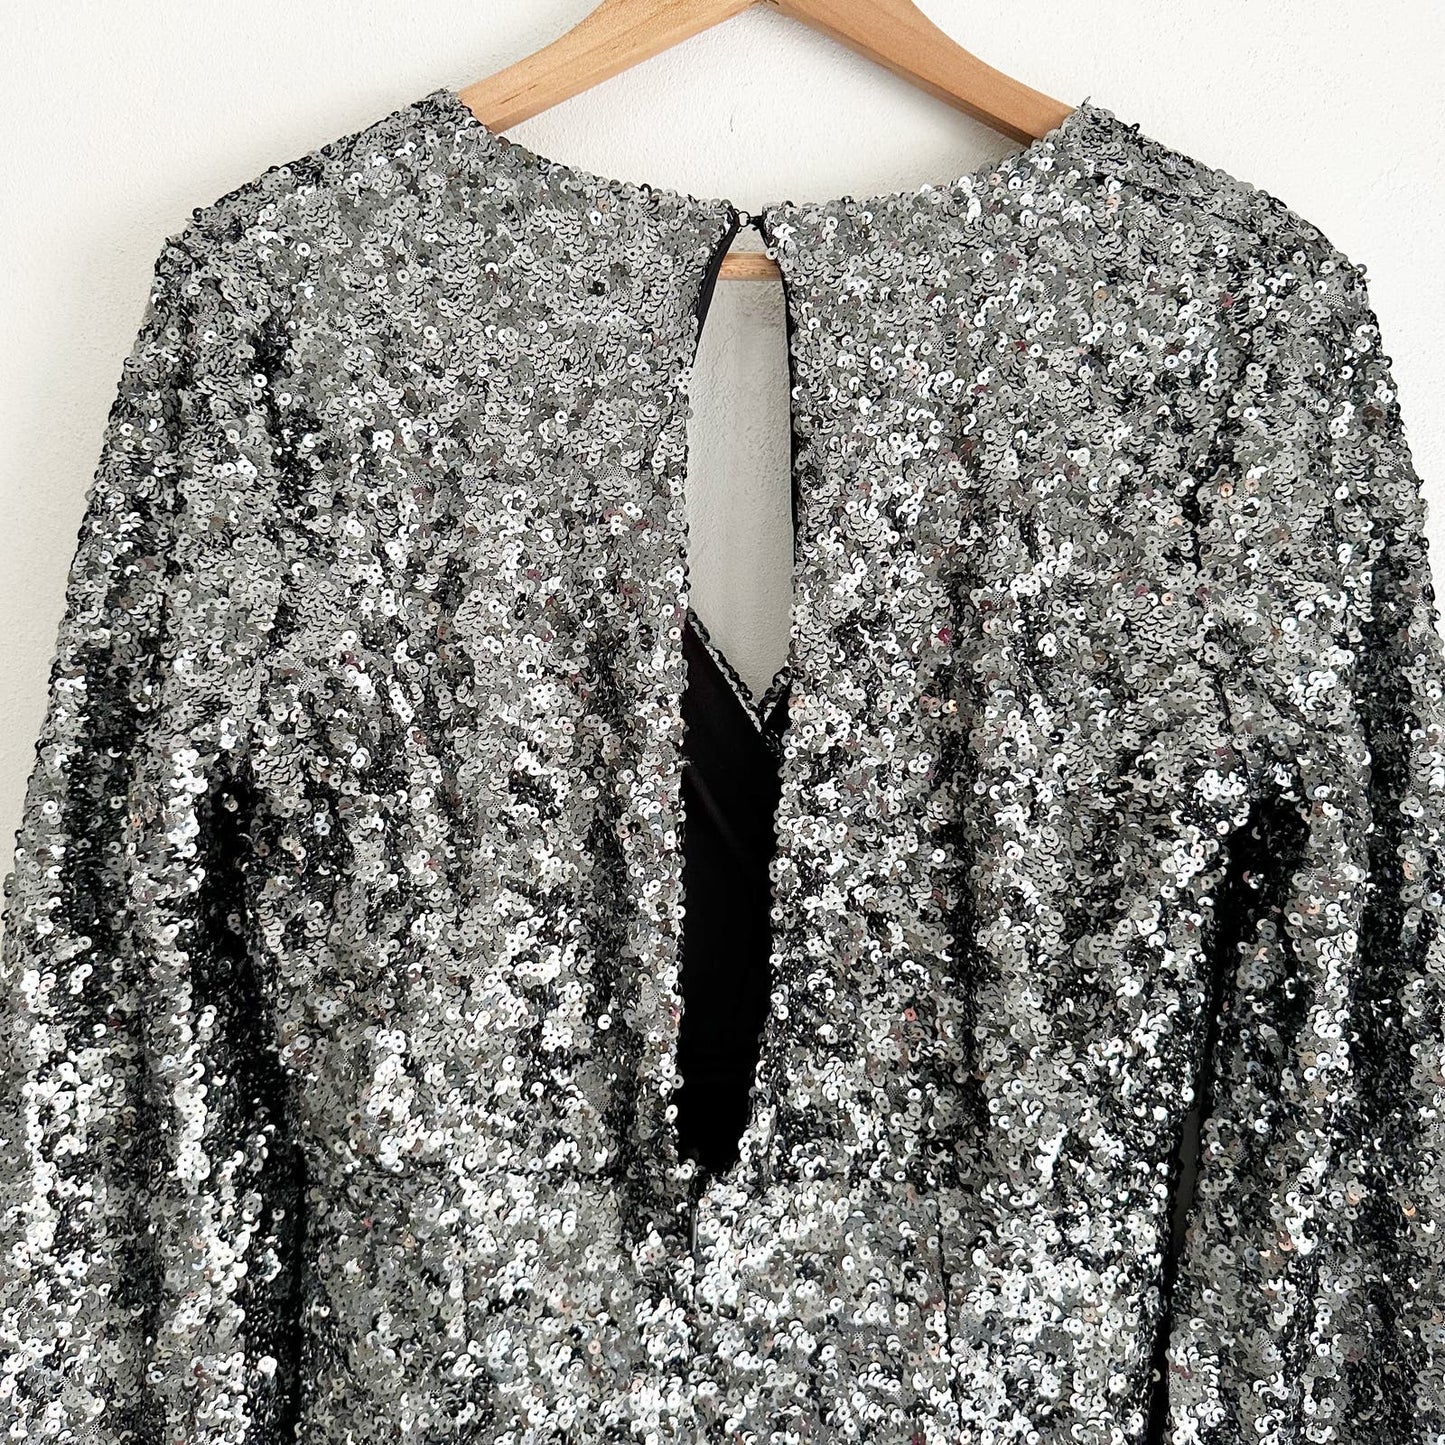 O.P.T. Anthropologie Rumi V Neck Long Sleeve Sequin Mini Dress Silver Small